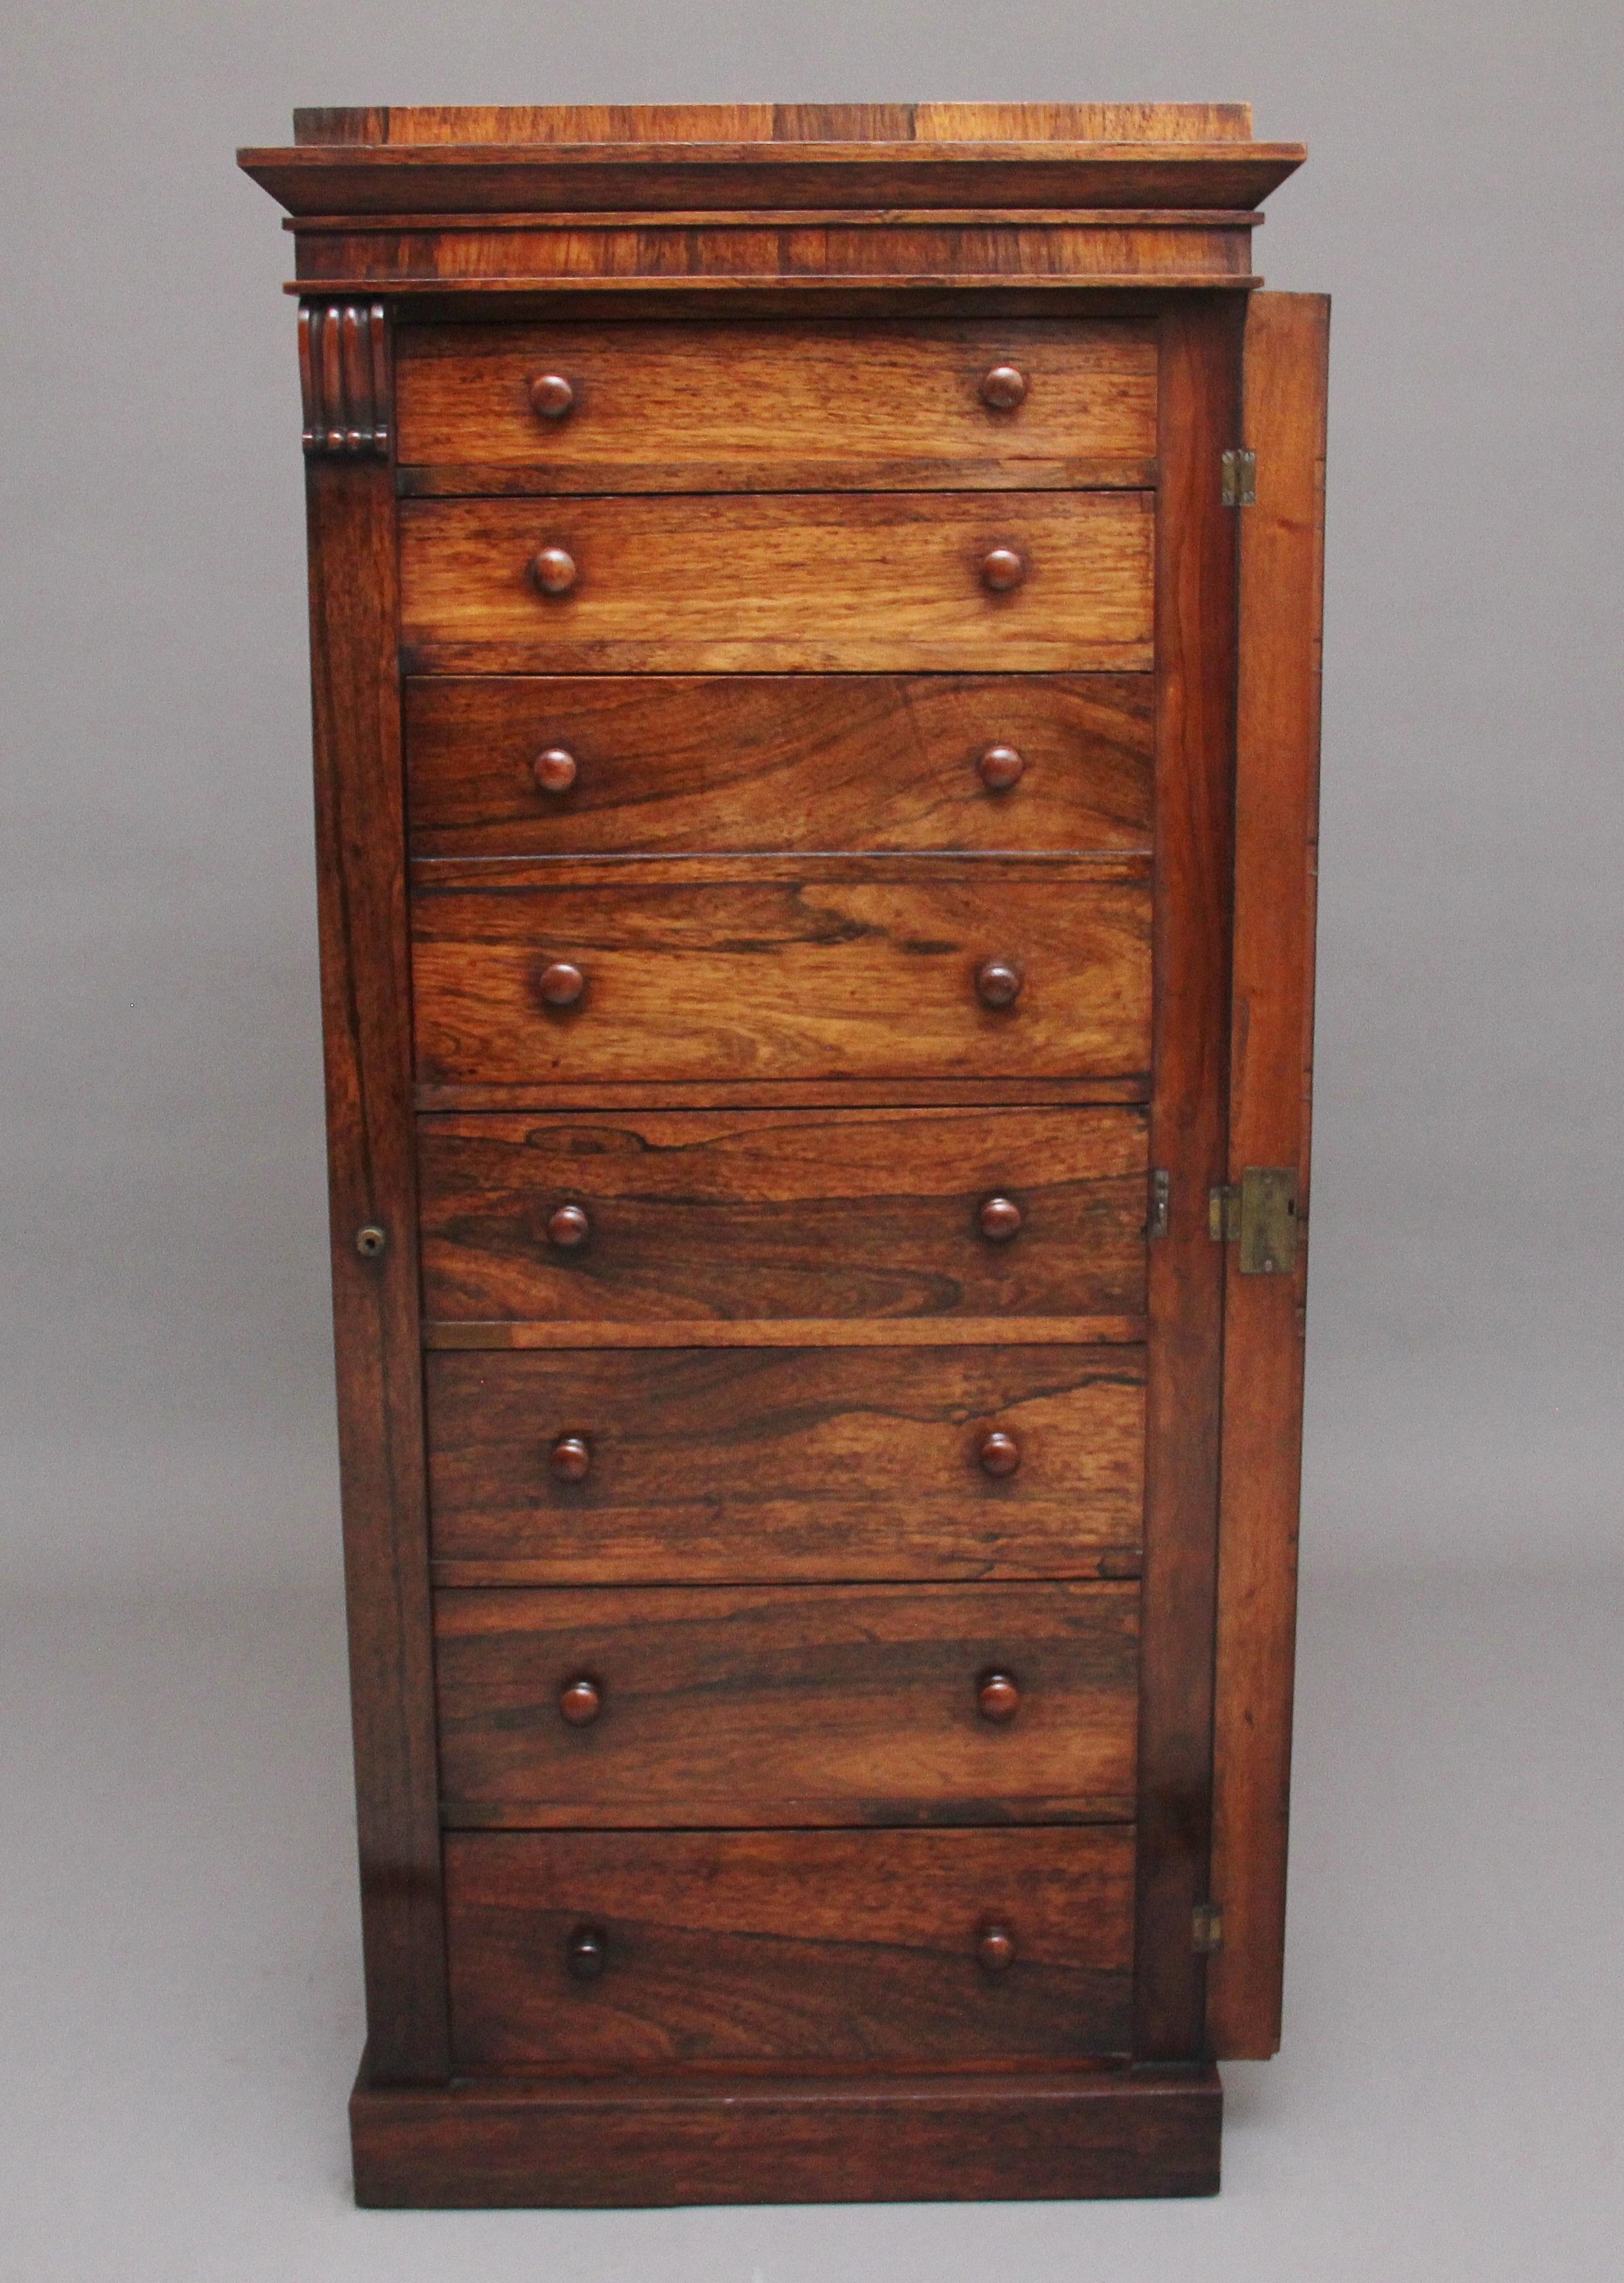 Early 19th century rosewood Wellington chest, having a nice figured top sitting above a shaped cornice, seven graduated drawers below with the original wooden turned knob handles, a secretaire drawer at the centre which pulls out and to reveal